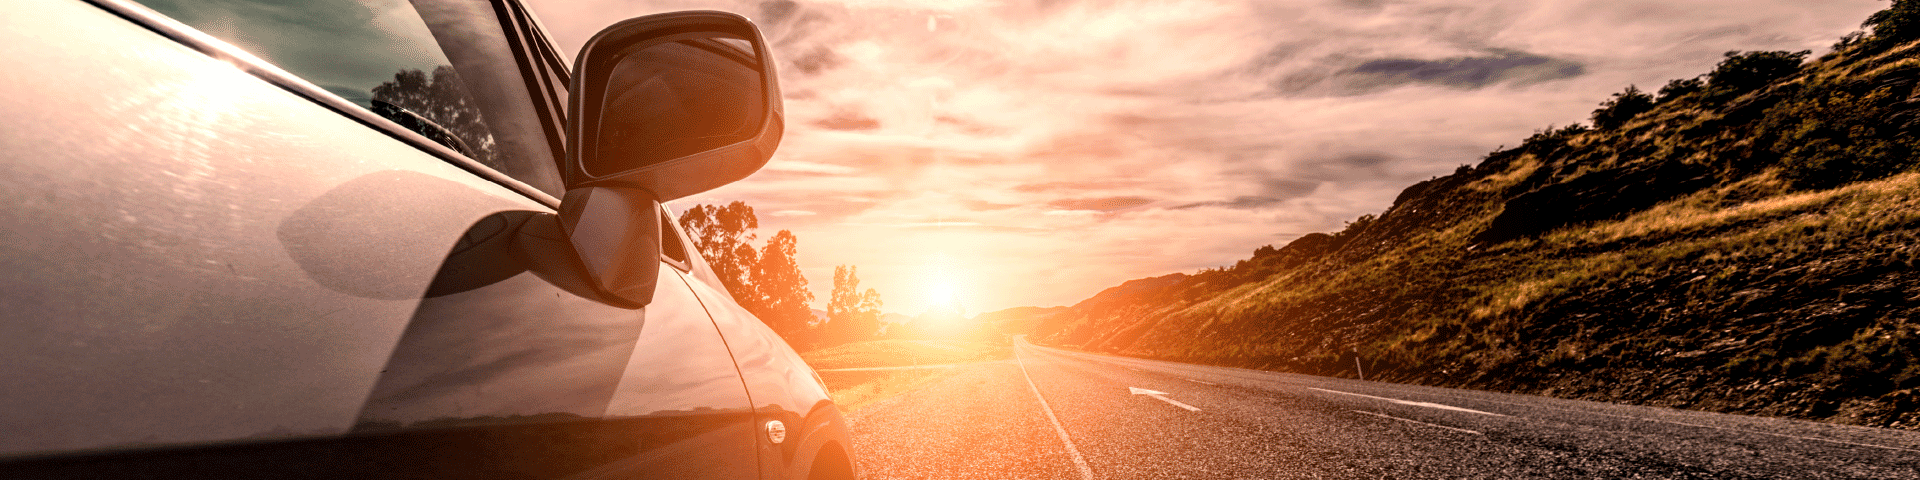 Image of a car driving down a highway with mountains on the right side and the sun setting.